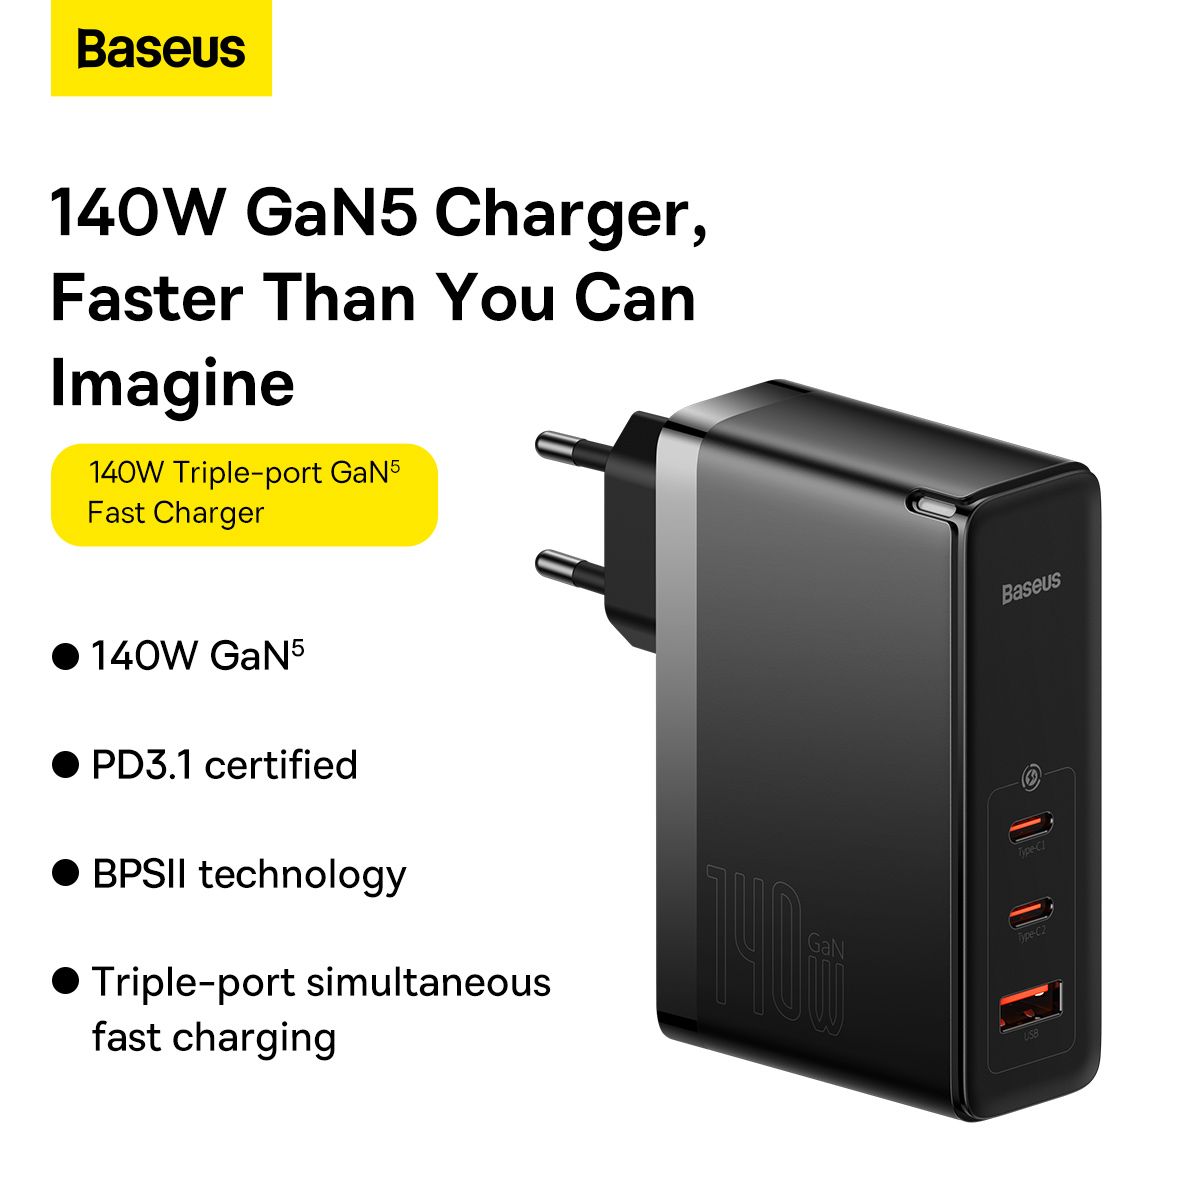 Baseus USB C Charger, 140W Wall Charger PD 3.1 with 3.3ft USB C to C Cable, 3-Port GaN5 Charger for Laptops, iPad, iPhone 14 13 Series, Galaxy, MacBoo